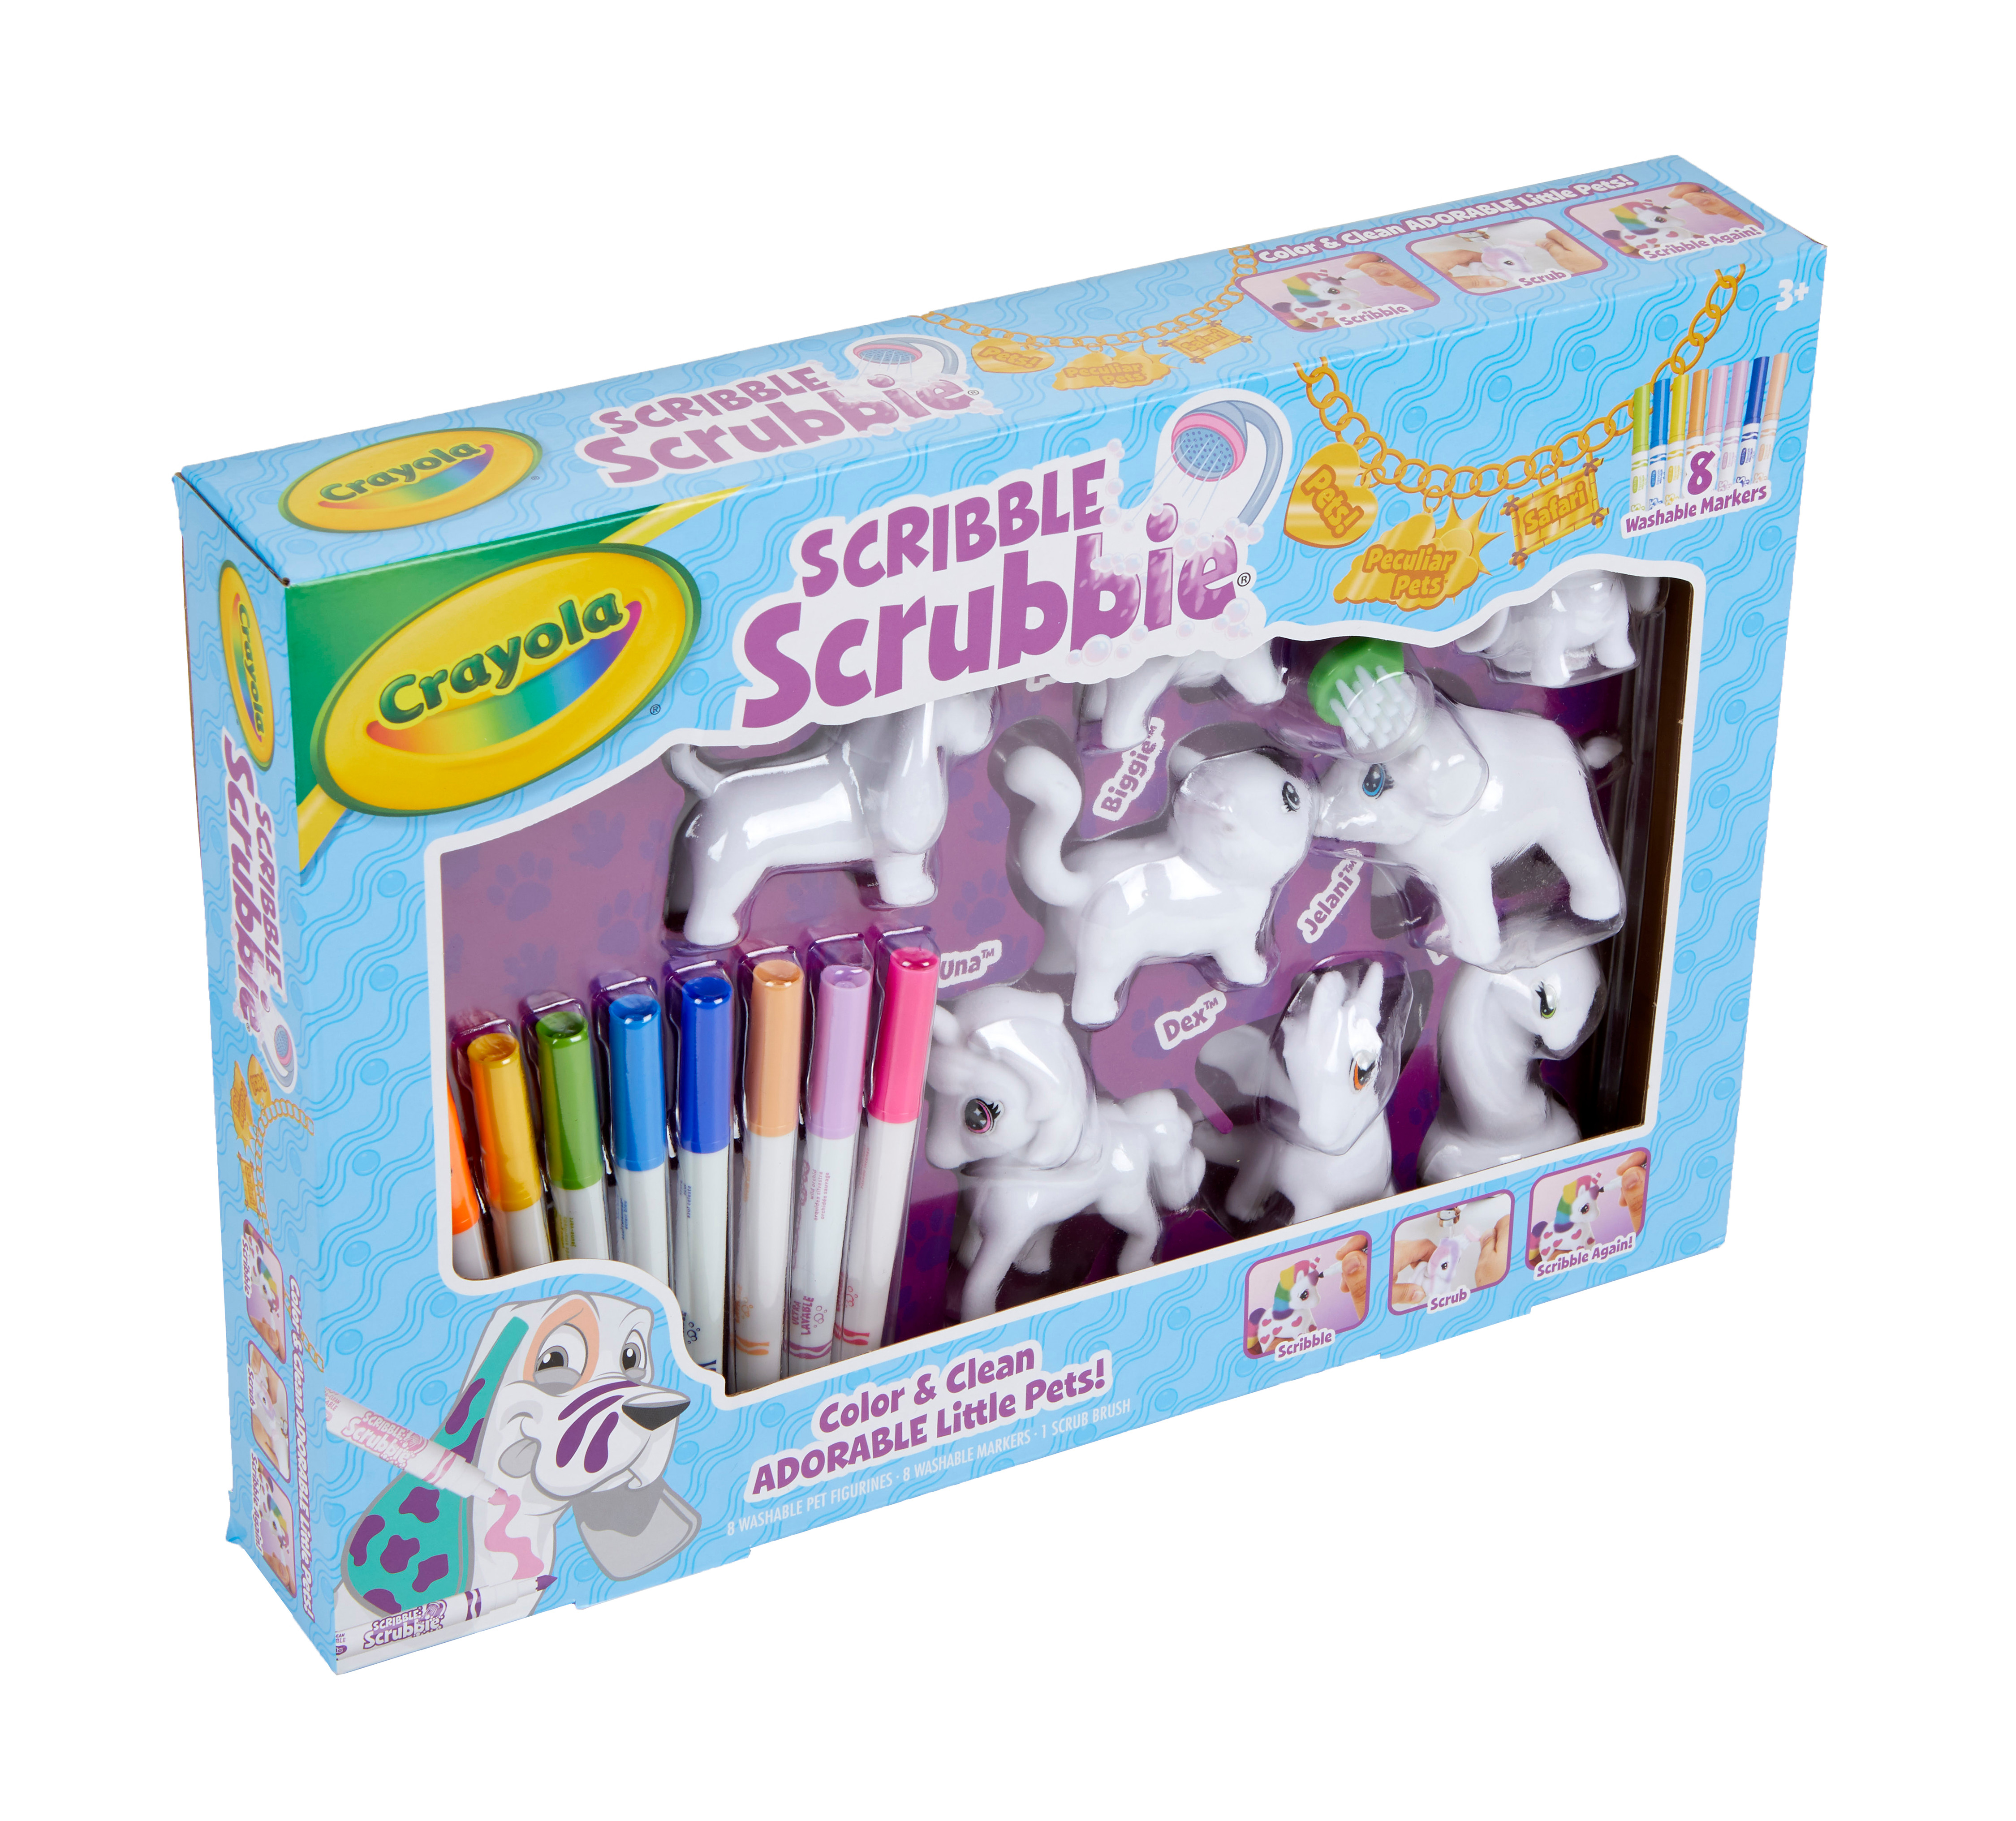 Crayola Scribble Scrubbie Pets, Coloring Toy Animal, Holiday Gift for Kids, Beginner Child - image 3 of 8